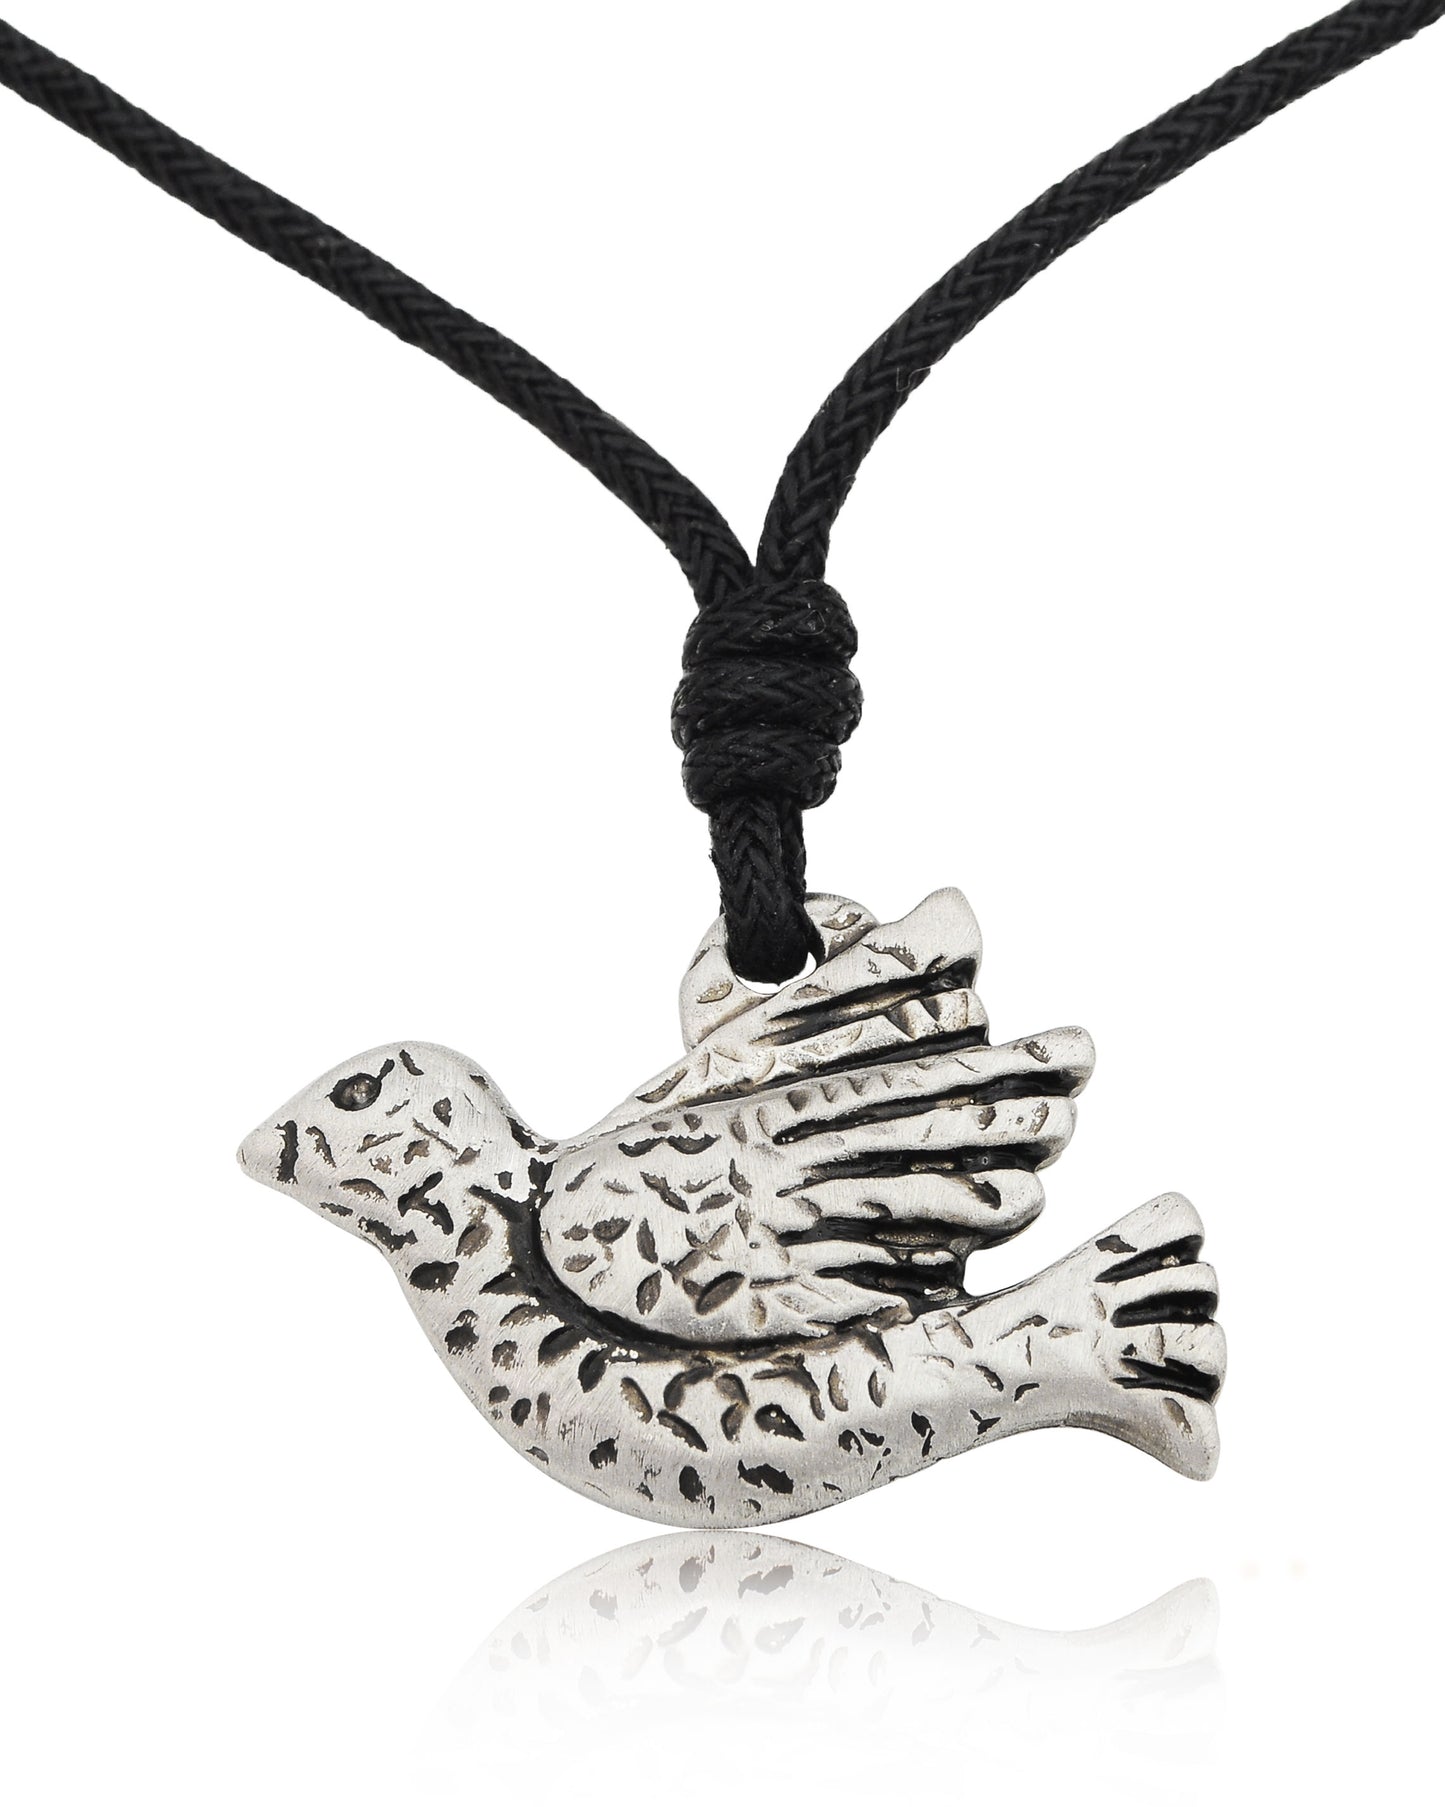 Unique Dove Bird of Peace Silver Pewter Charm Necklace Pendant Jewelry